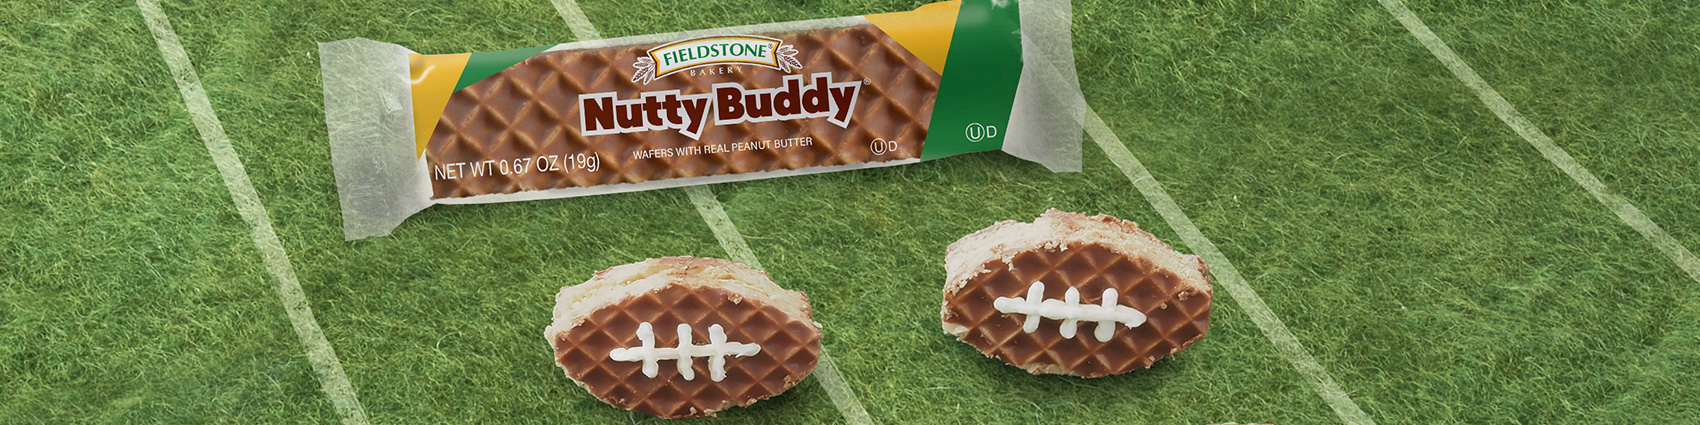 Nutty Buddy bars cut and iced to look like small footballs sit on a fake football field background.